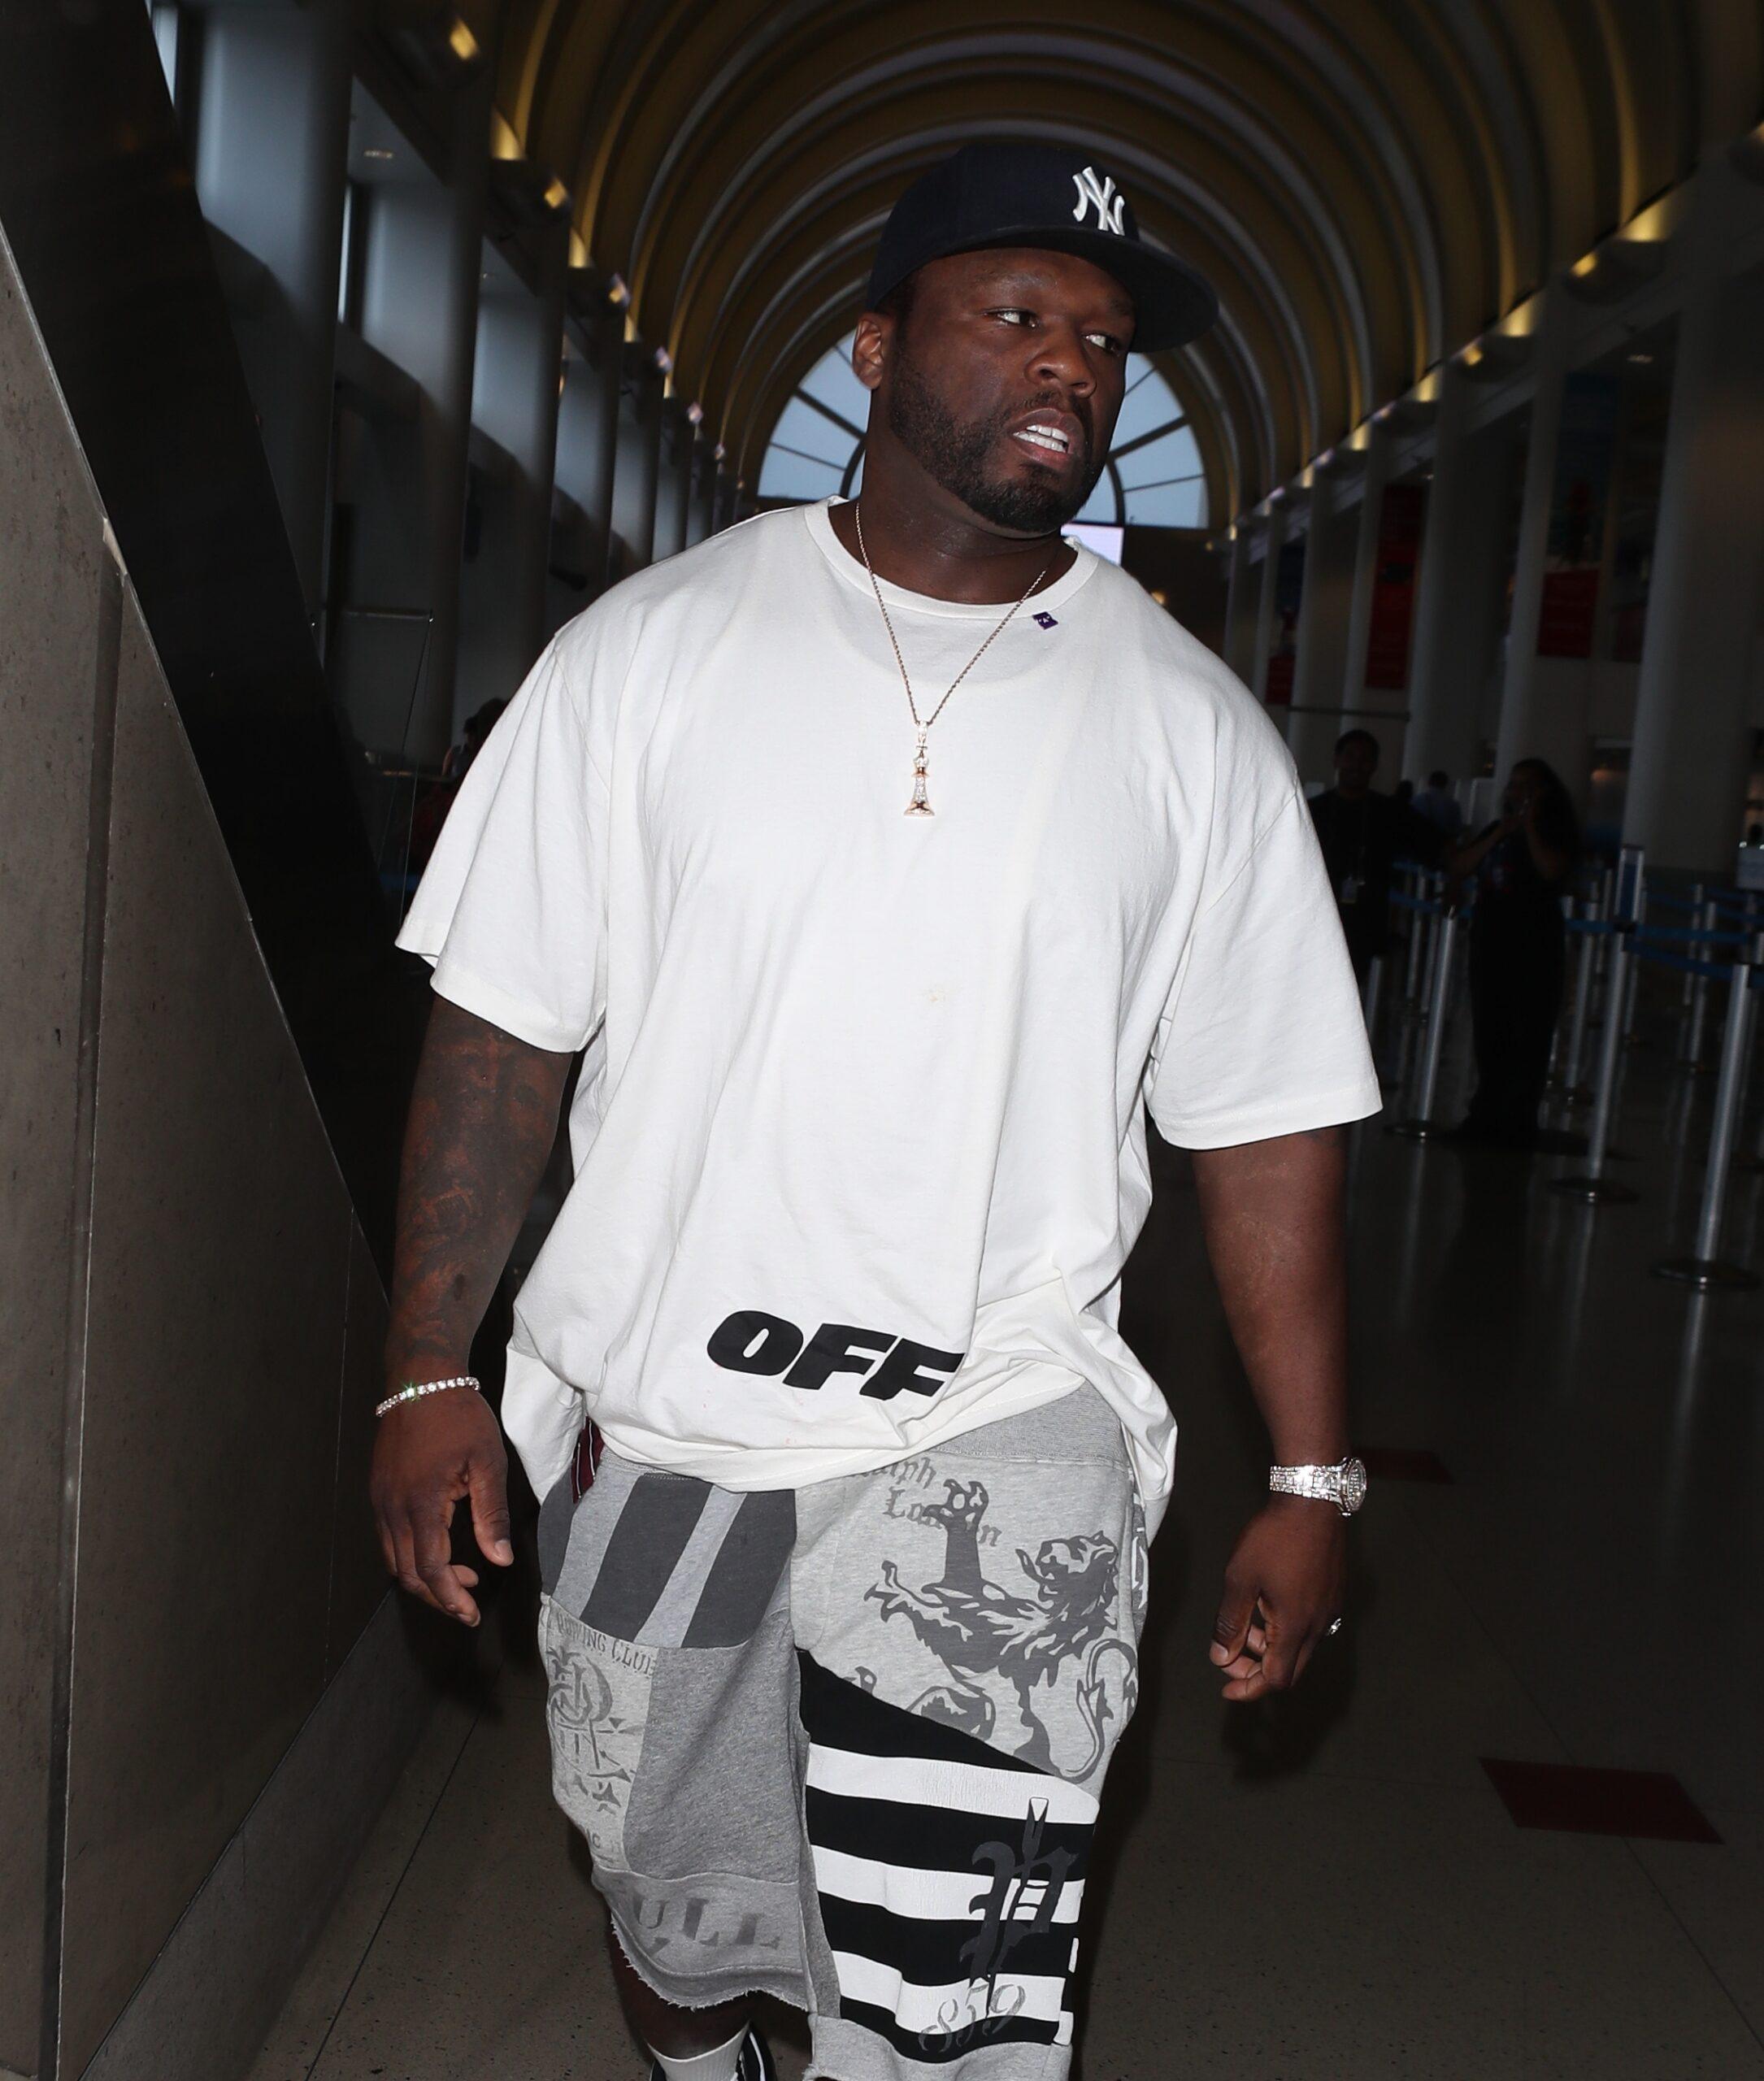 50 Cent's mom put toys in socks for him to use as weapons